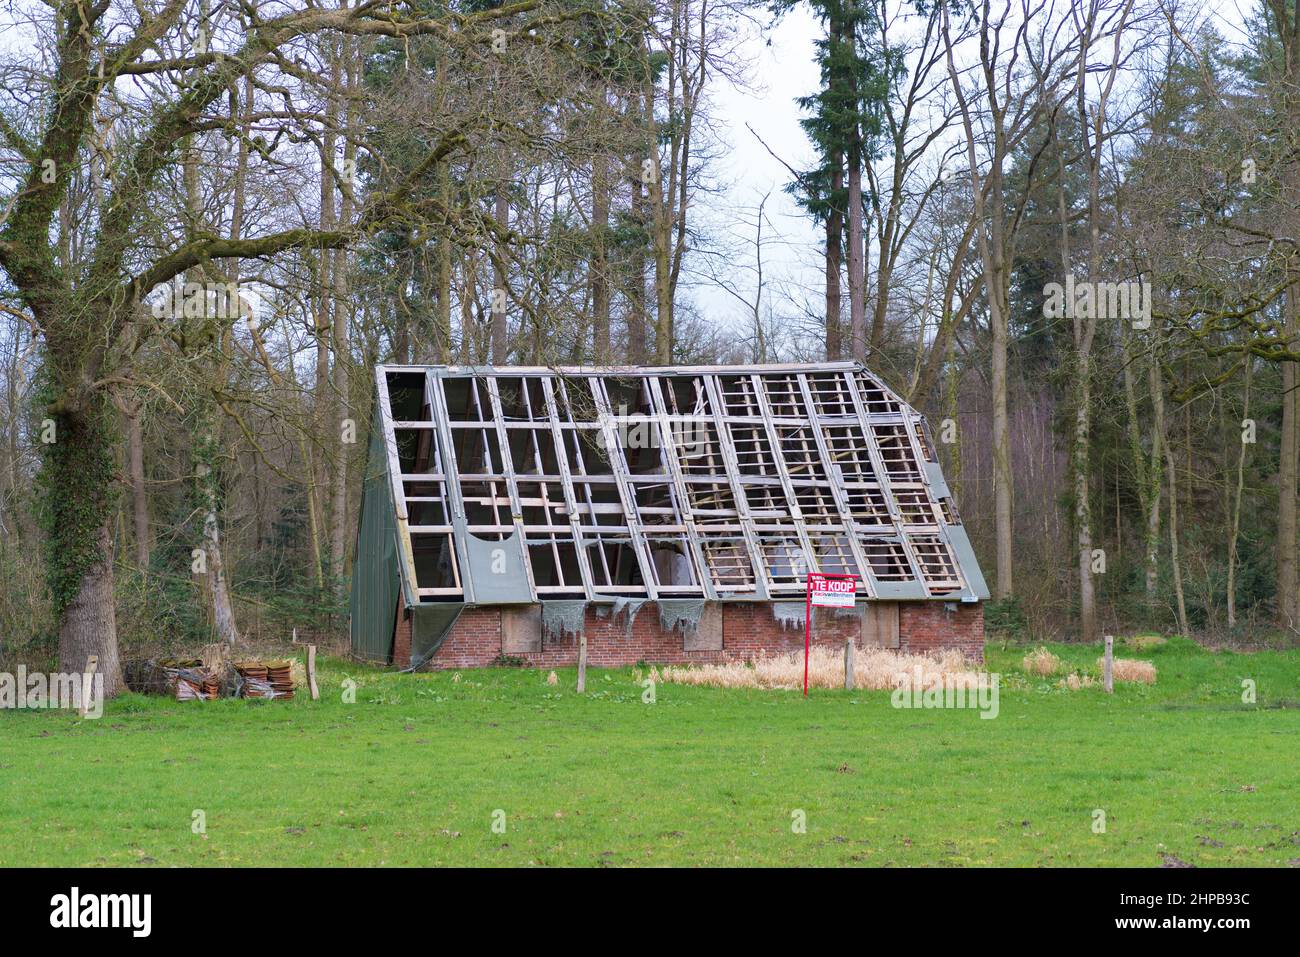 DENEKAMP, NETHERLANDS - MARCH 8, 2020: Old farmhouse with no roof for sale in a rural landscape. Stock Photo